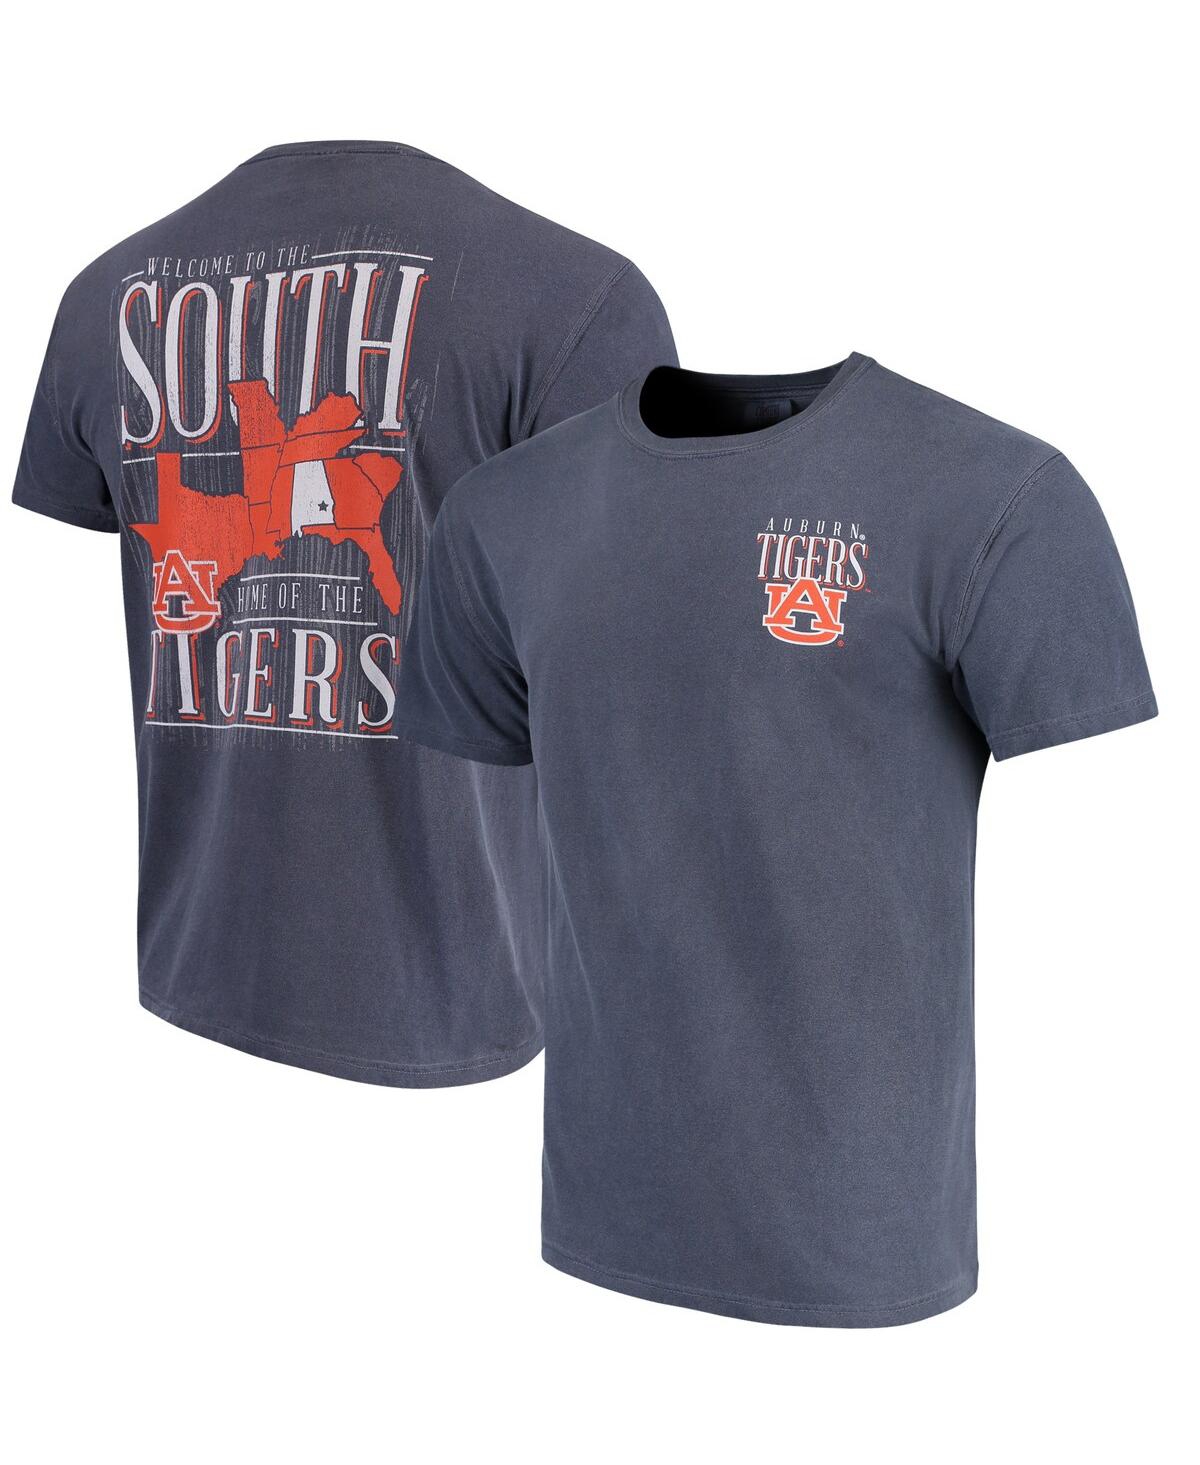 IMAGE ONE MEN'S NAVY AUBURN TIGERS WELCOME TO THE SOUTH COMFORT COLORS T-SHIRT